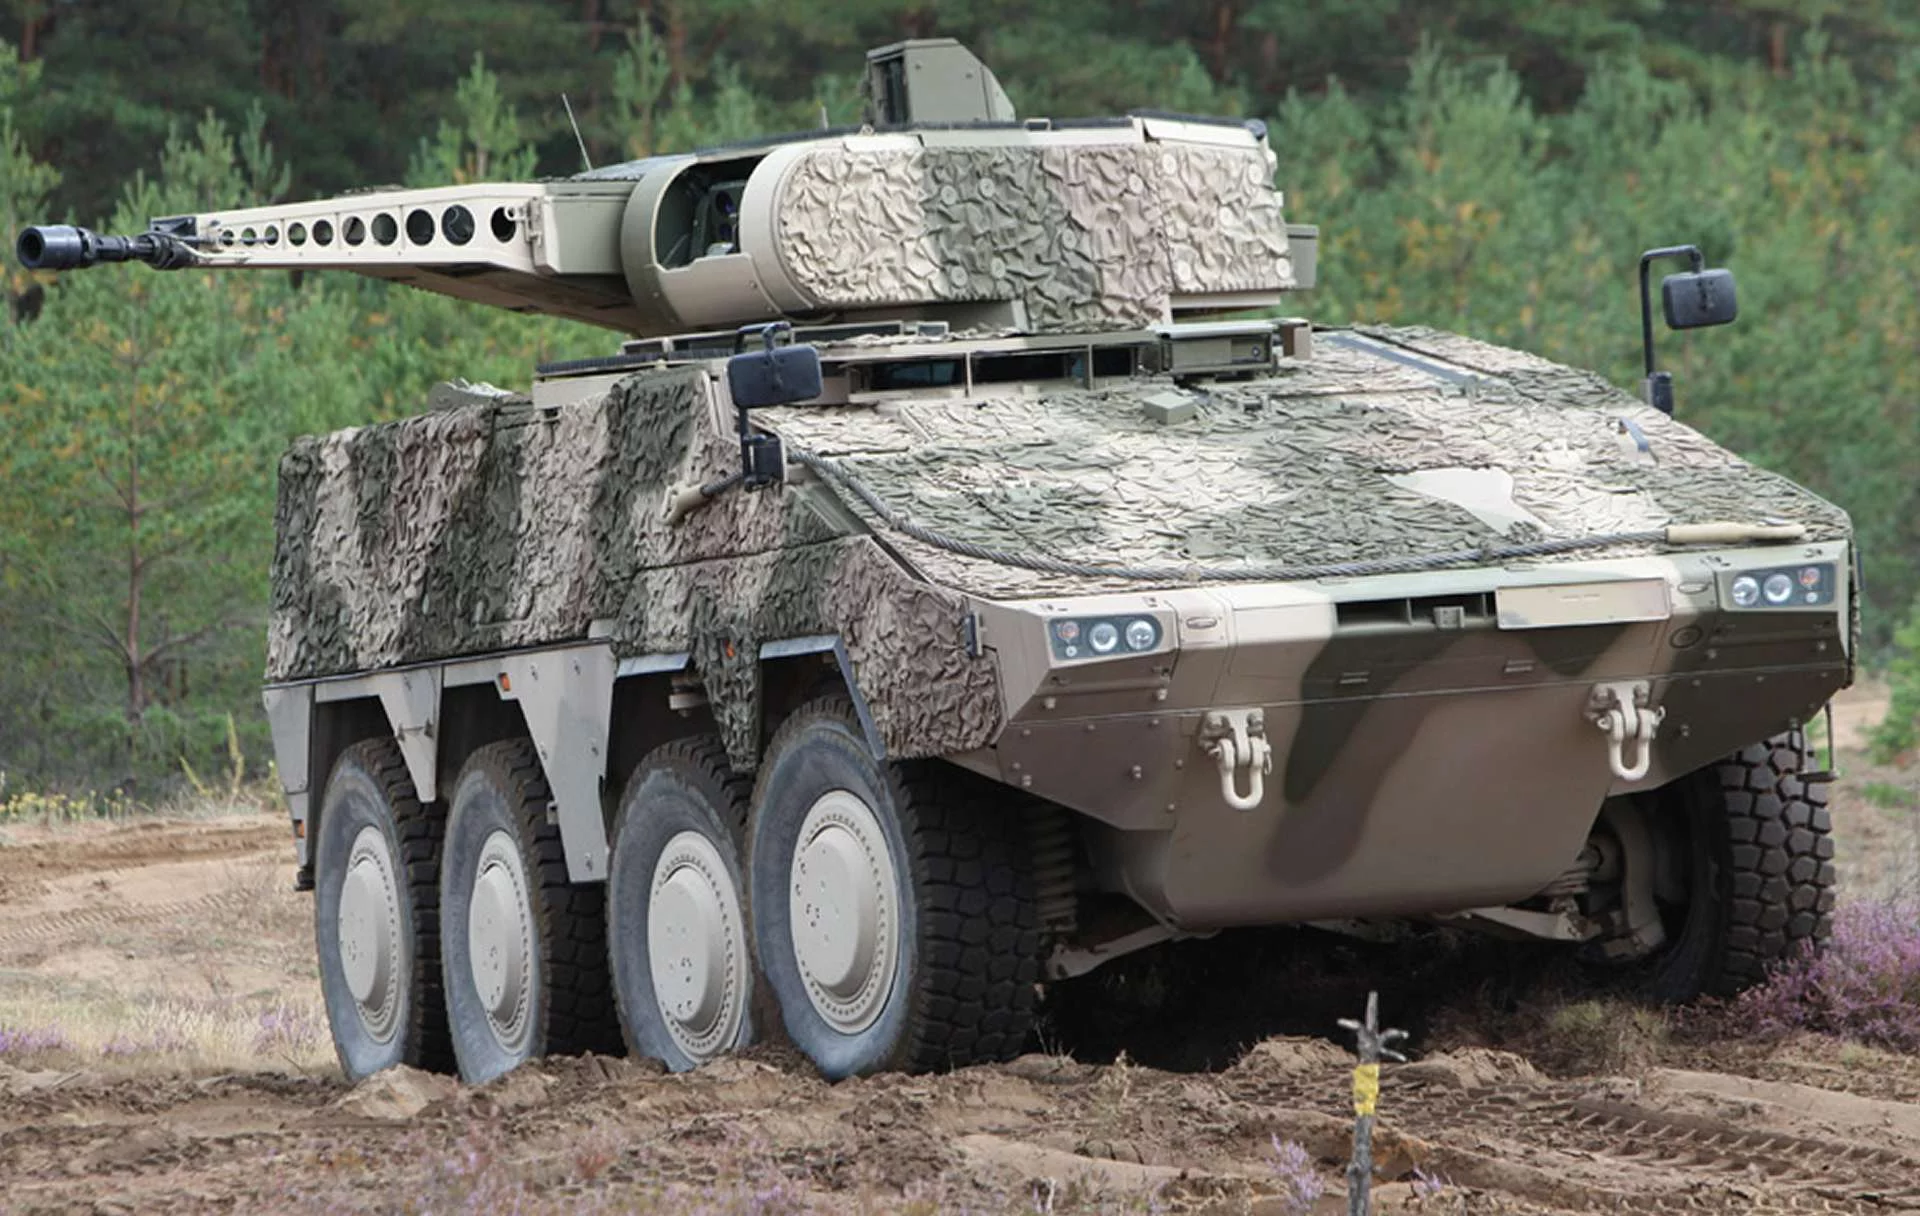 German_Army_to_acquire_148_Boxer_RCT30_IFVs_equipped_with_SPz_Puma_turrets_925_001-1529acc7.webp